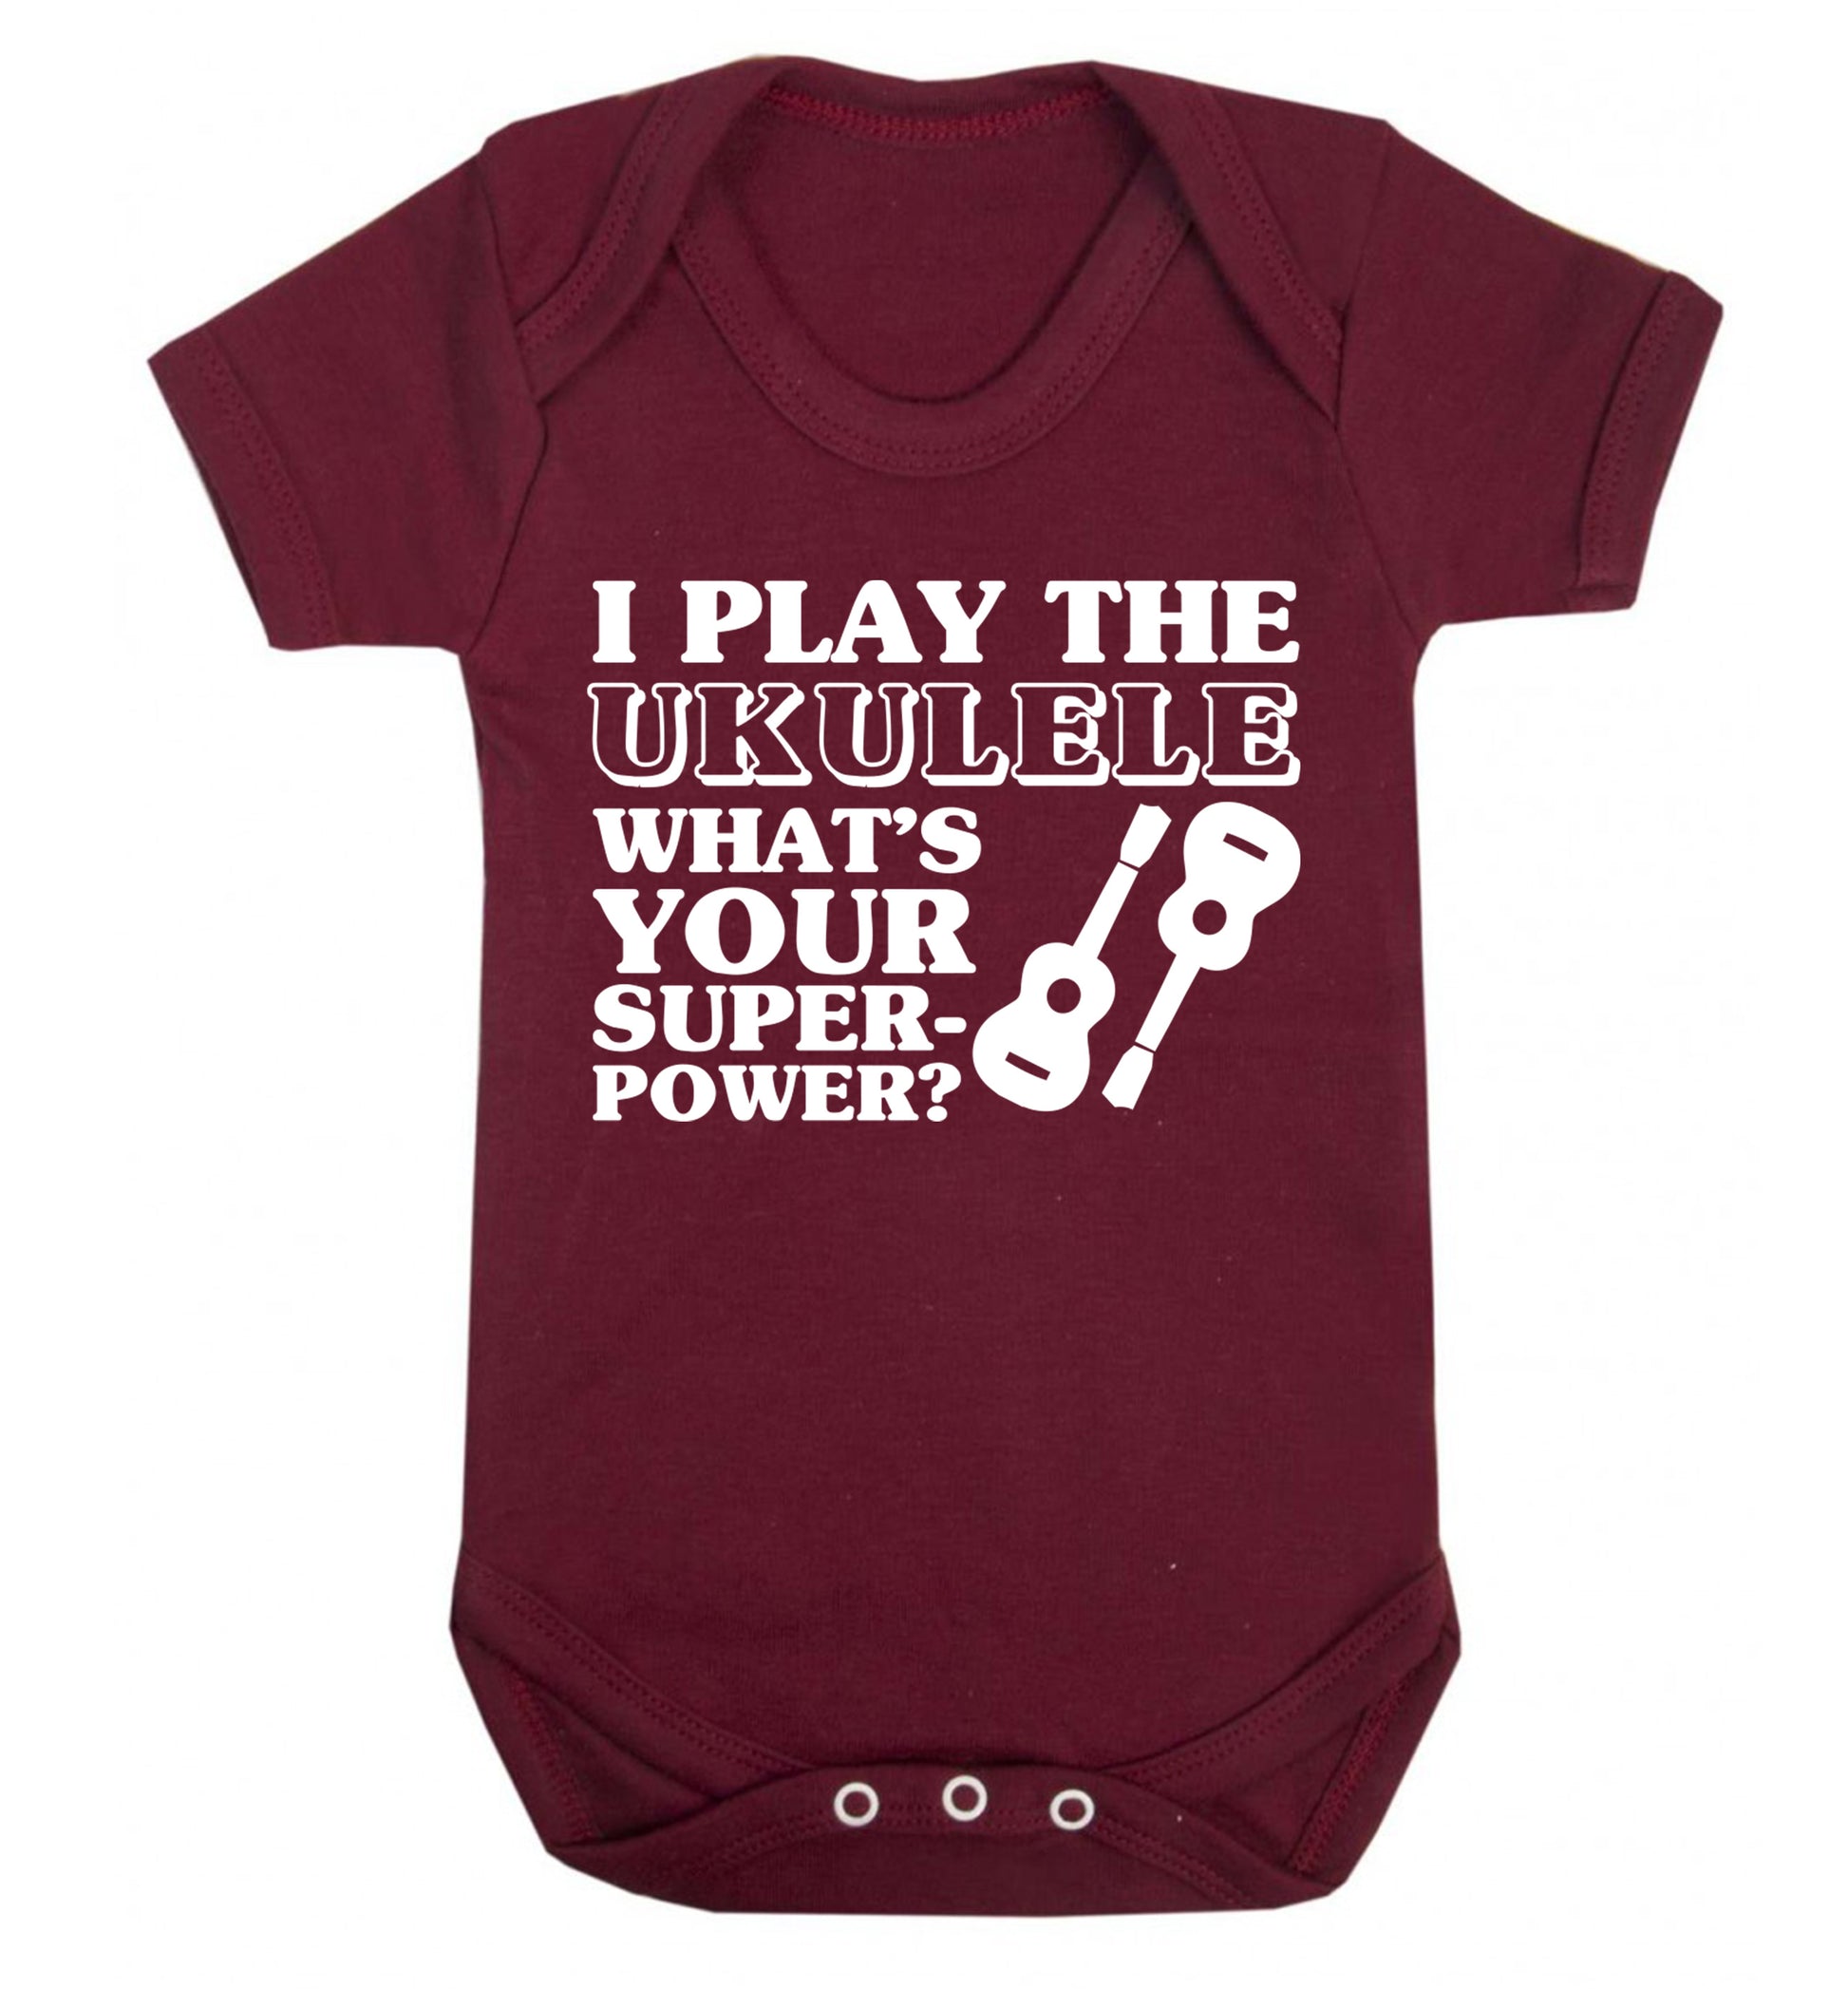 I play the ukulele what's your superpower? Baby Vest maroon 18-24 months